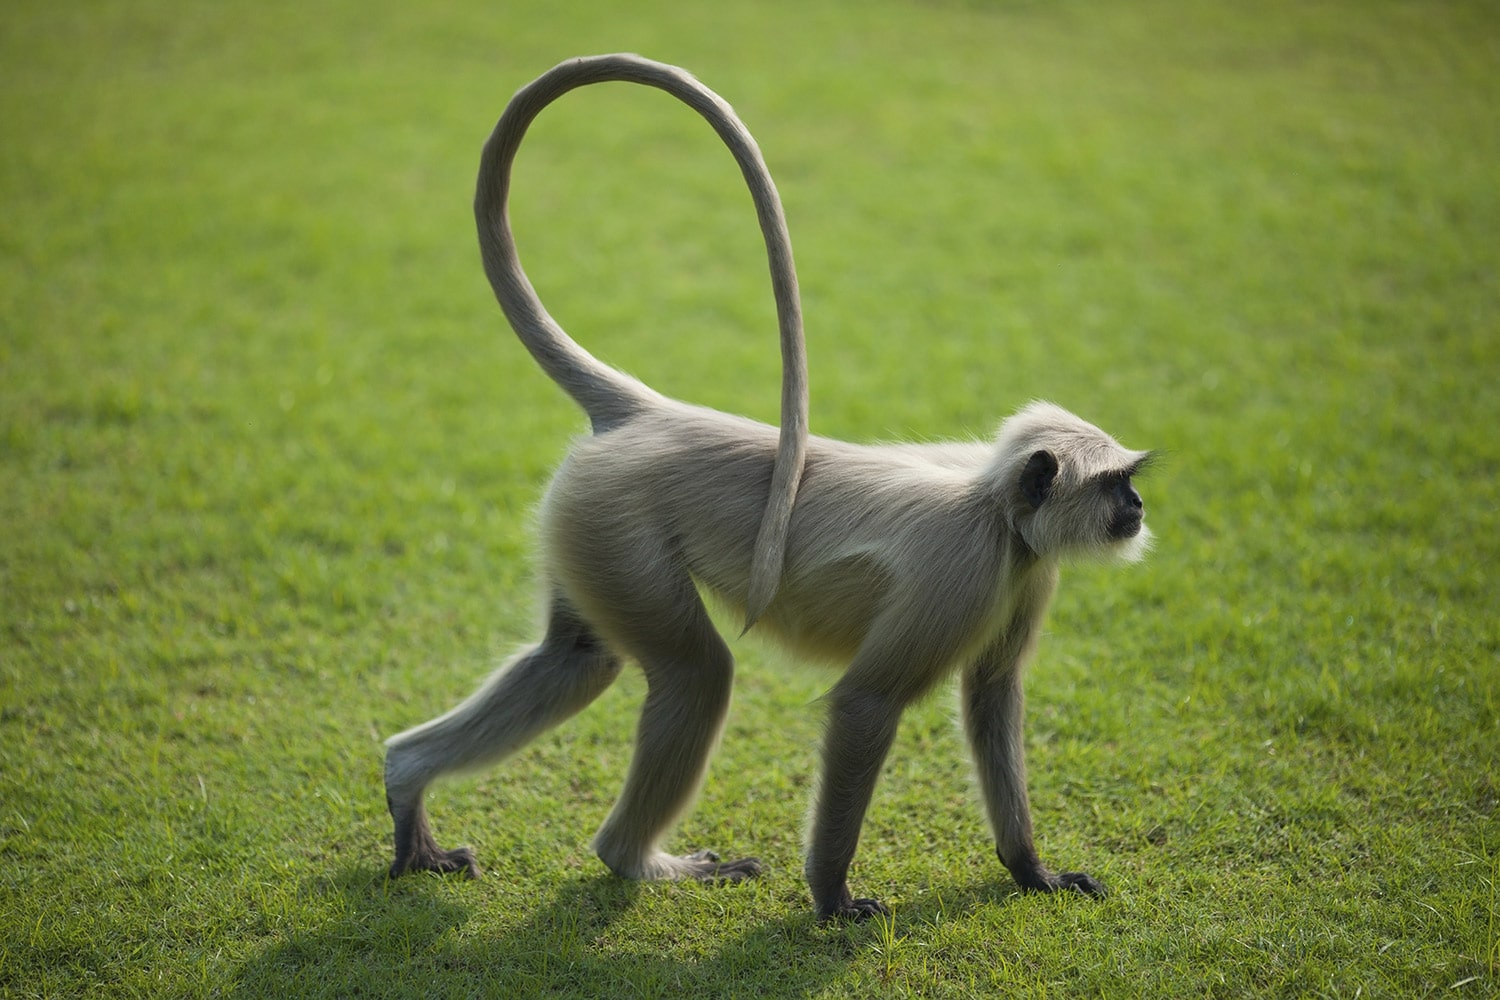 Monkeys have opposable thumbs, which allows them to grasp objects